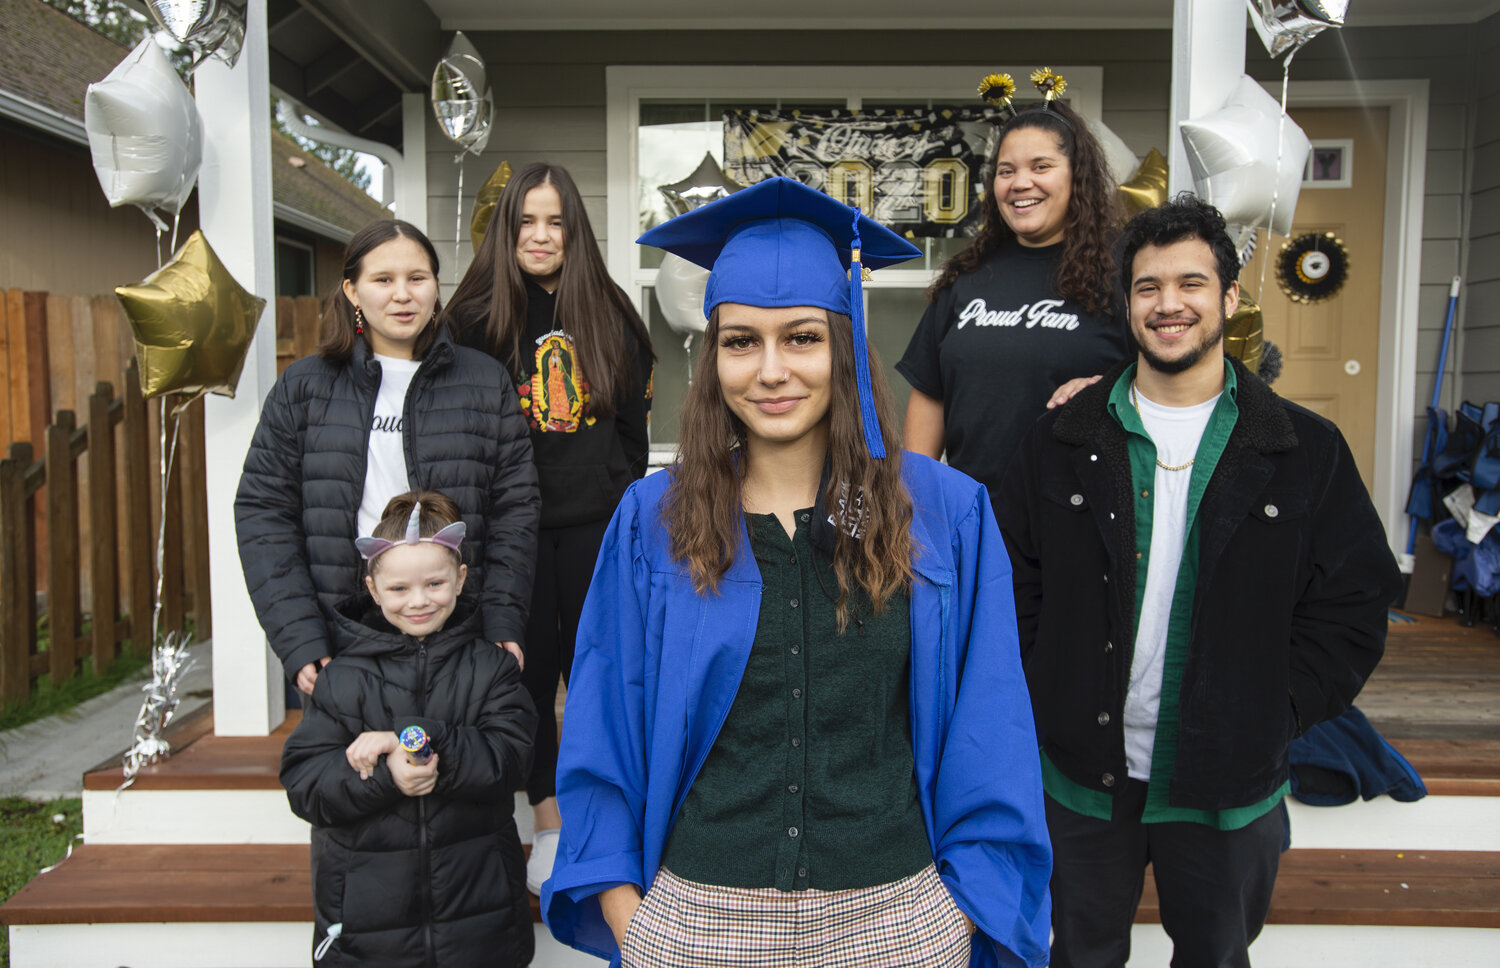 She Grew Up in a Drug-Addled Home. Now She’s a High School Grad Hero Image